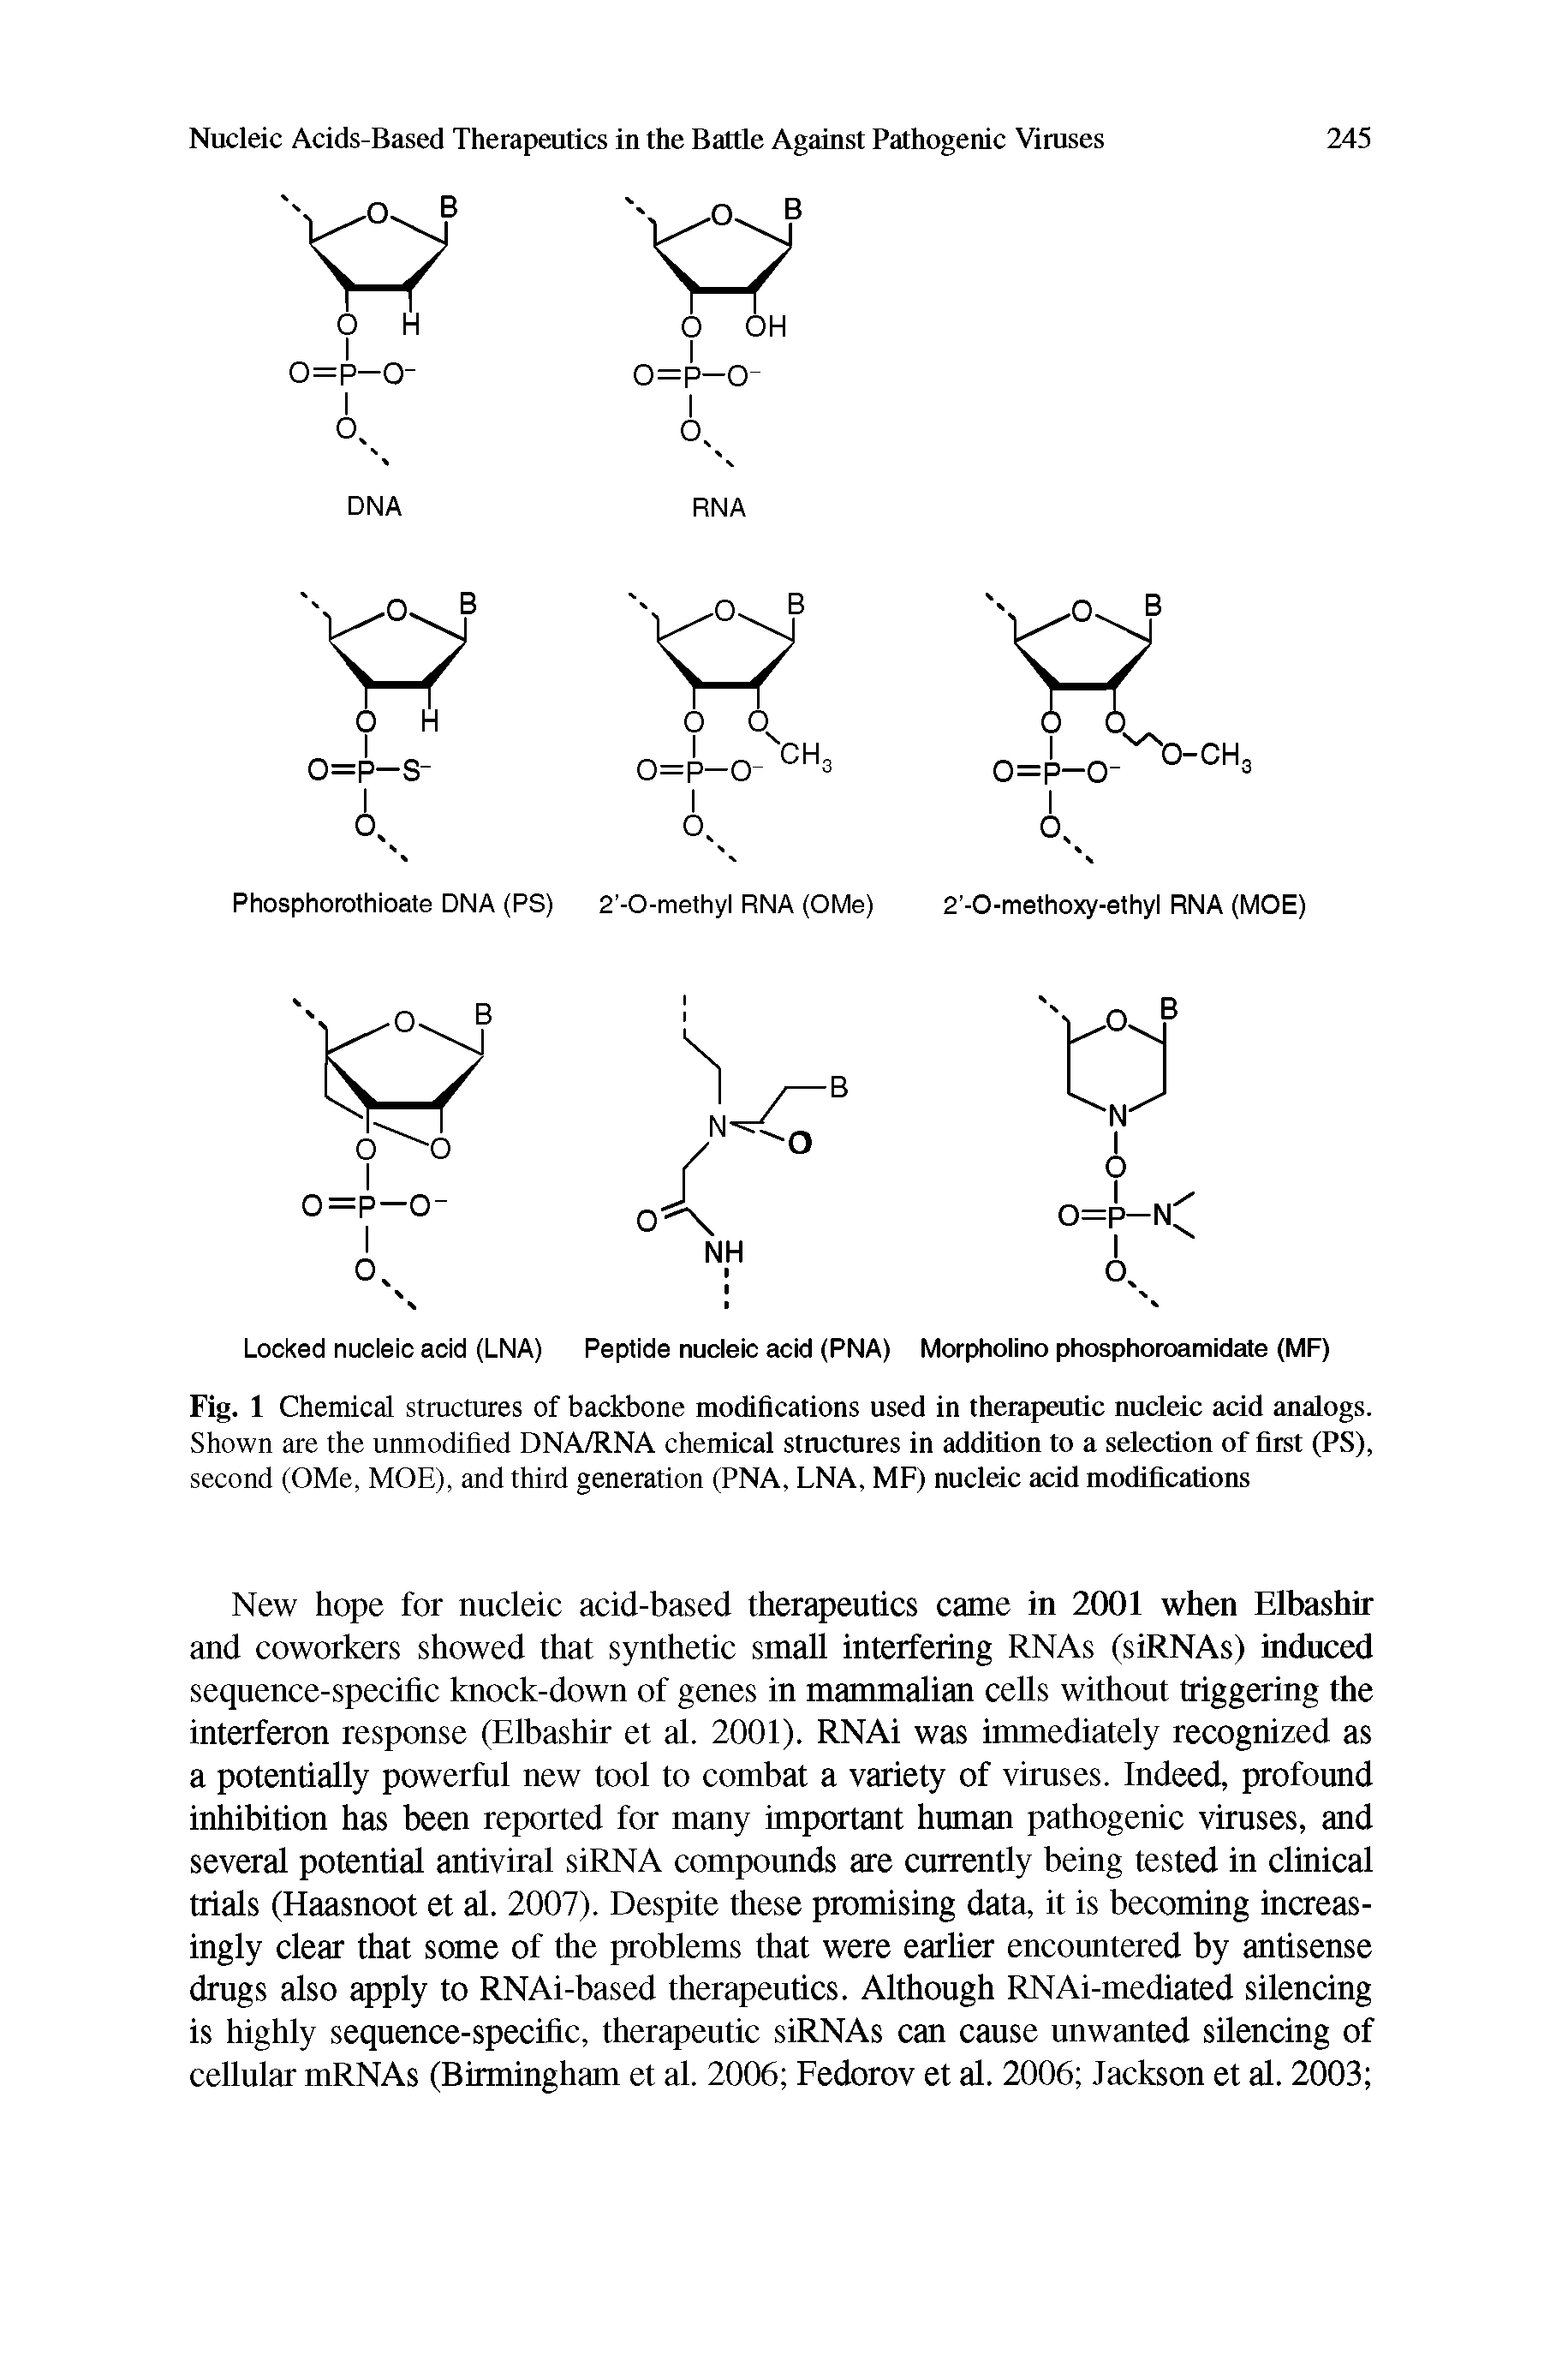 Fig. 1 Chemical structures of backbone modifications used in therapeutic nucleic acid analogs. Shown are the unmodified DNA/RNA chemical structures in addition to a selection of first (PS), second (OMe, MOE), and third generation (PNA, LNA, MF) nucleic acid modifications...